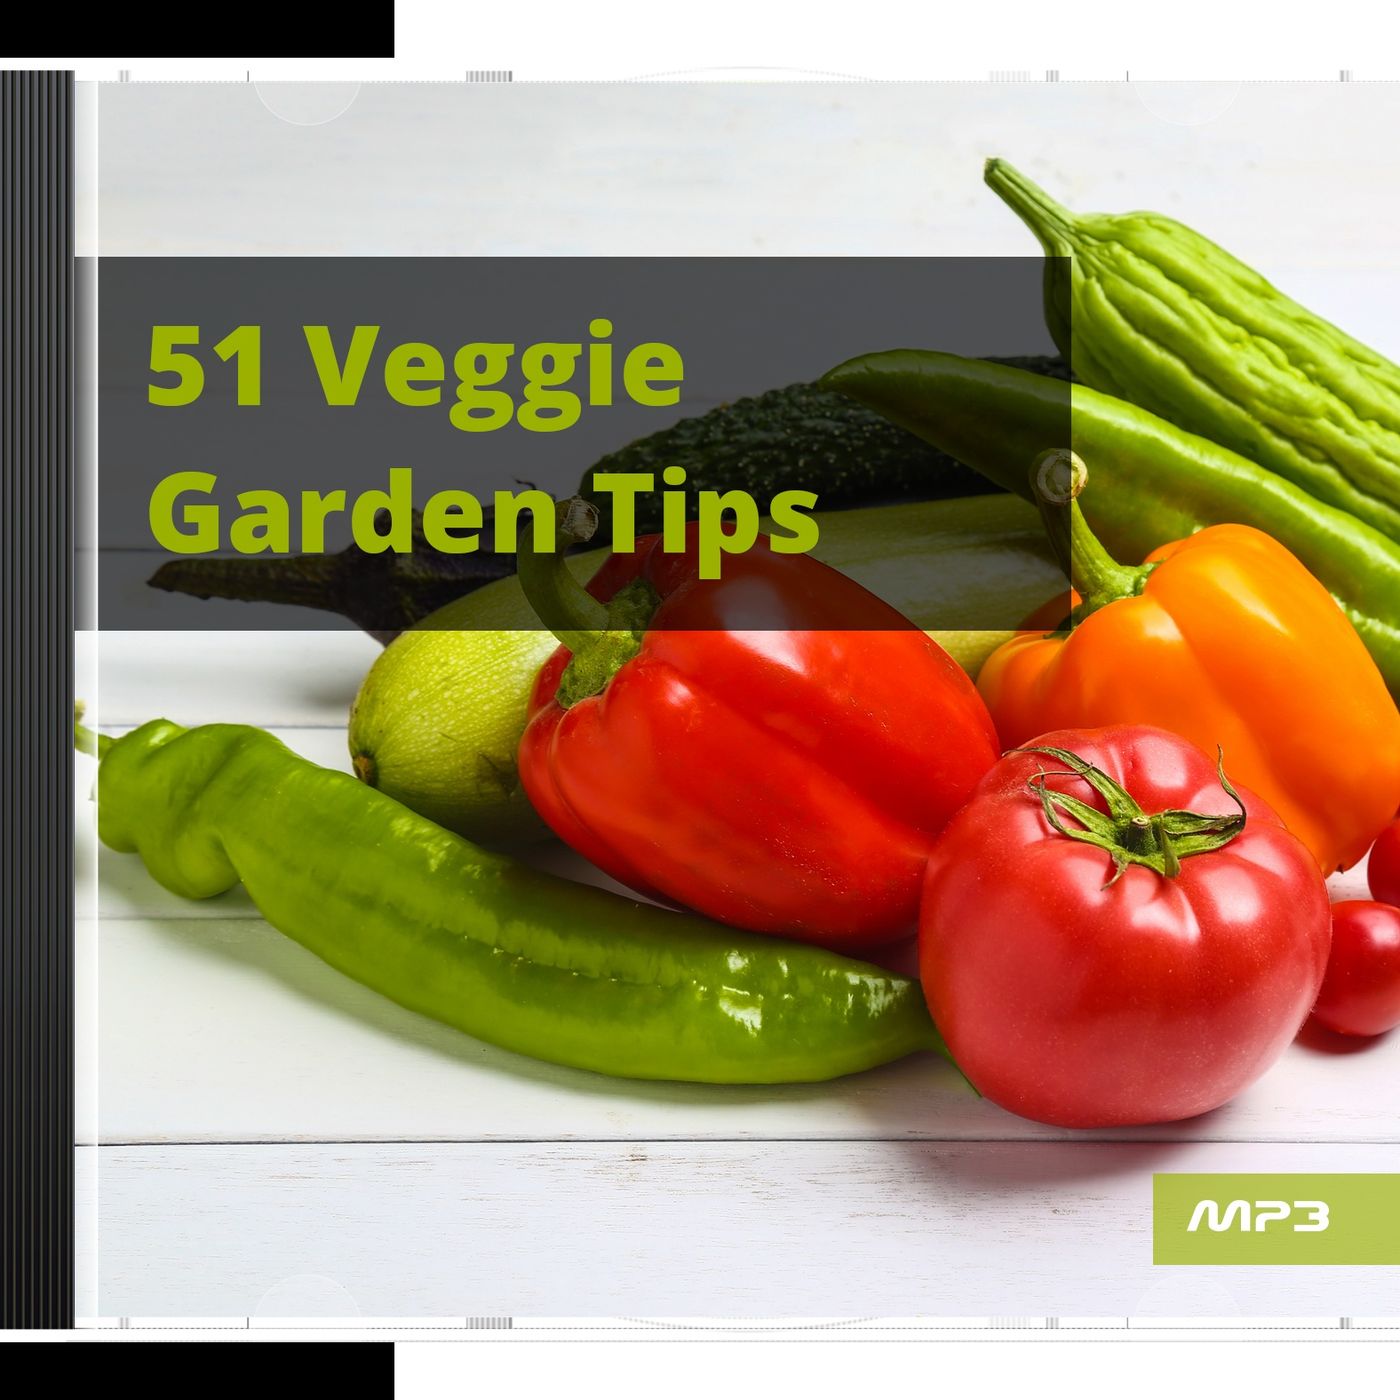 Listen to these 51 tips for the vegetable garden